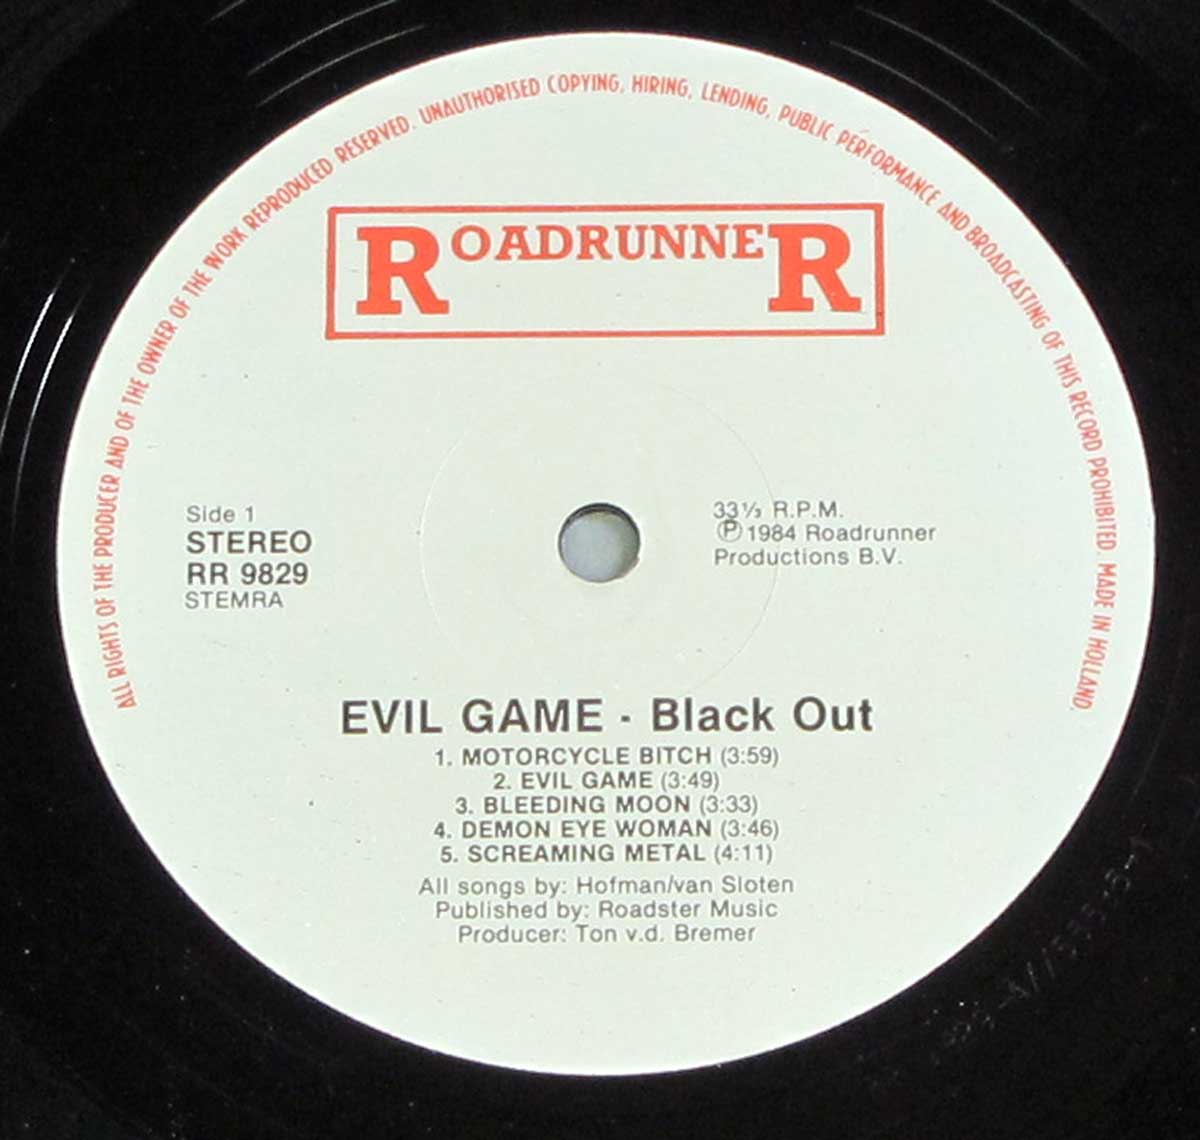 Enlarged High Resolution Photo of the Record's label BLACK OUT - Evil Game https://vinyl-records.nl